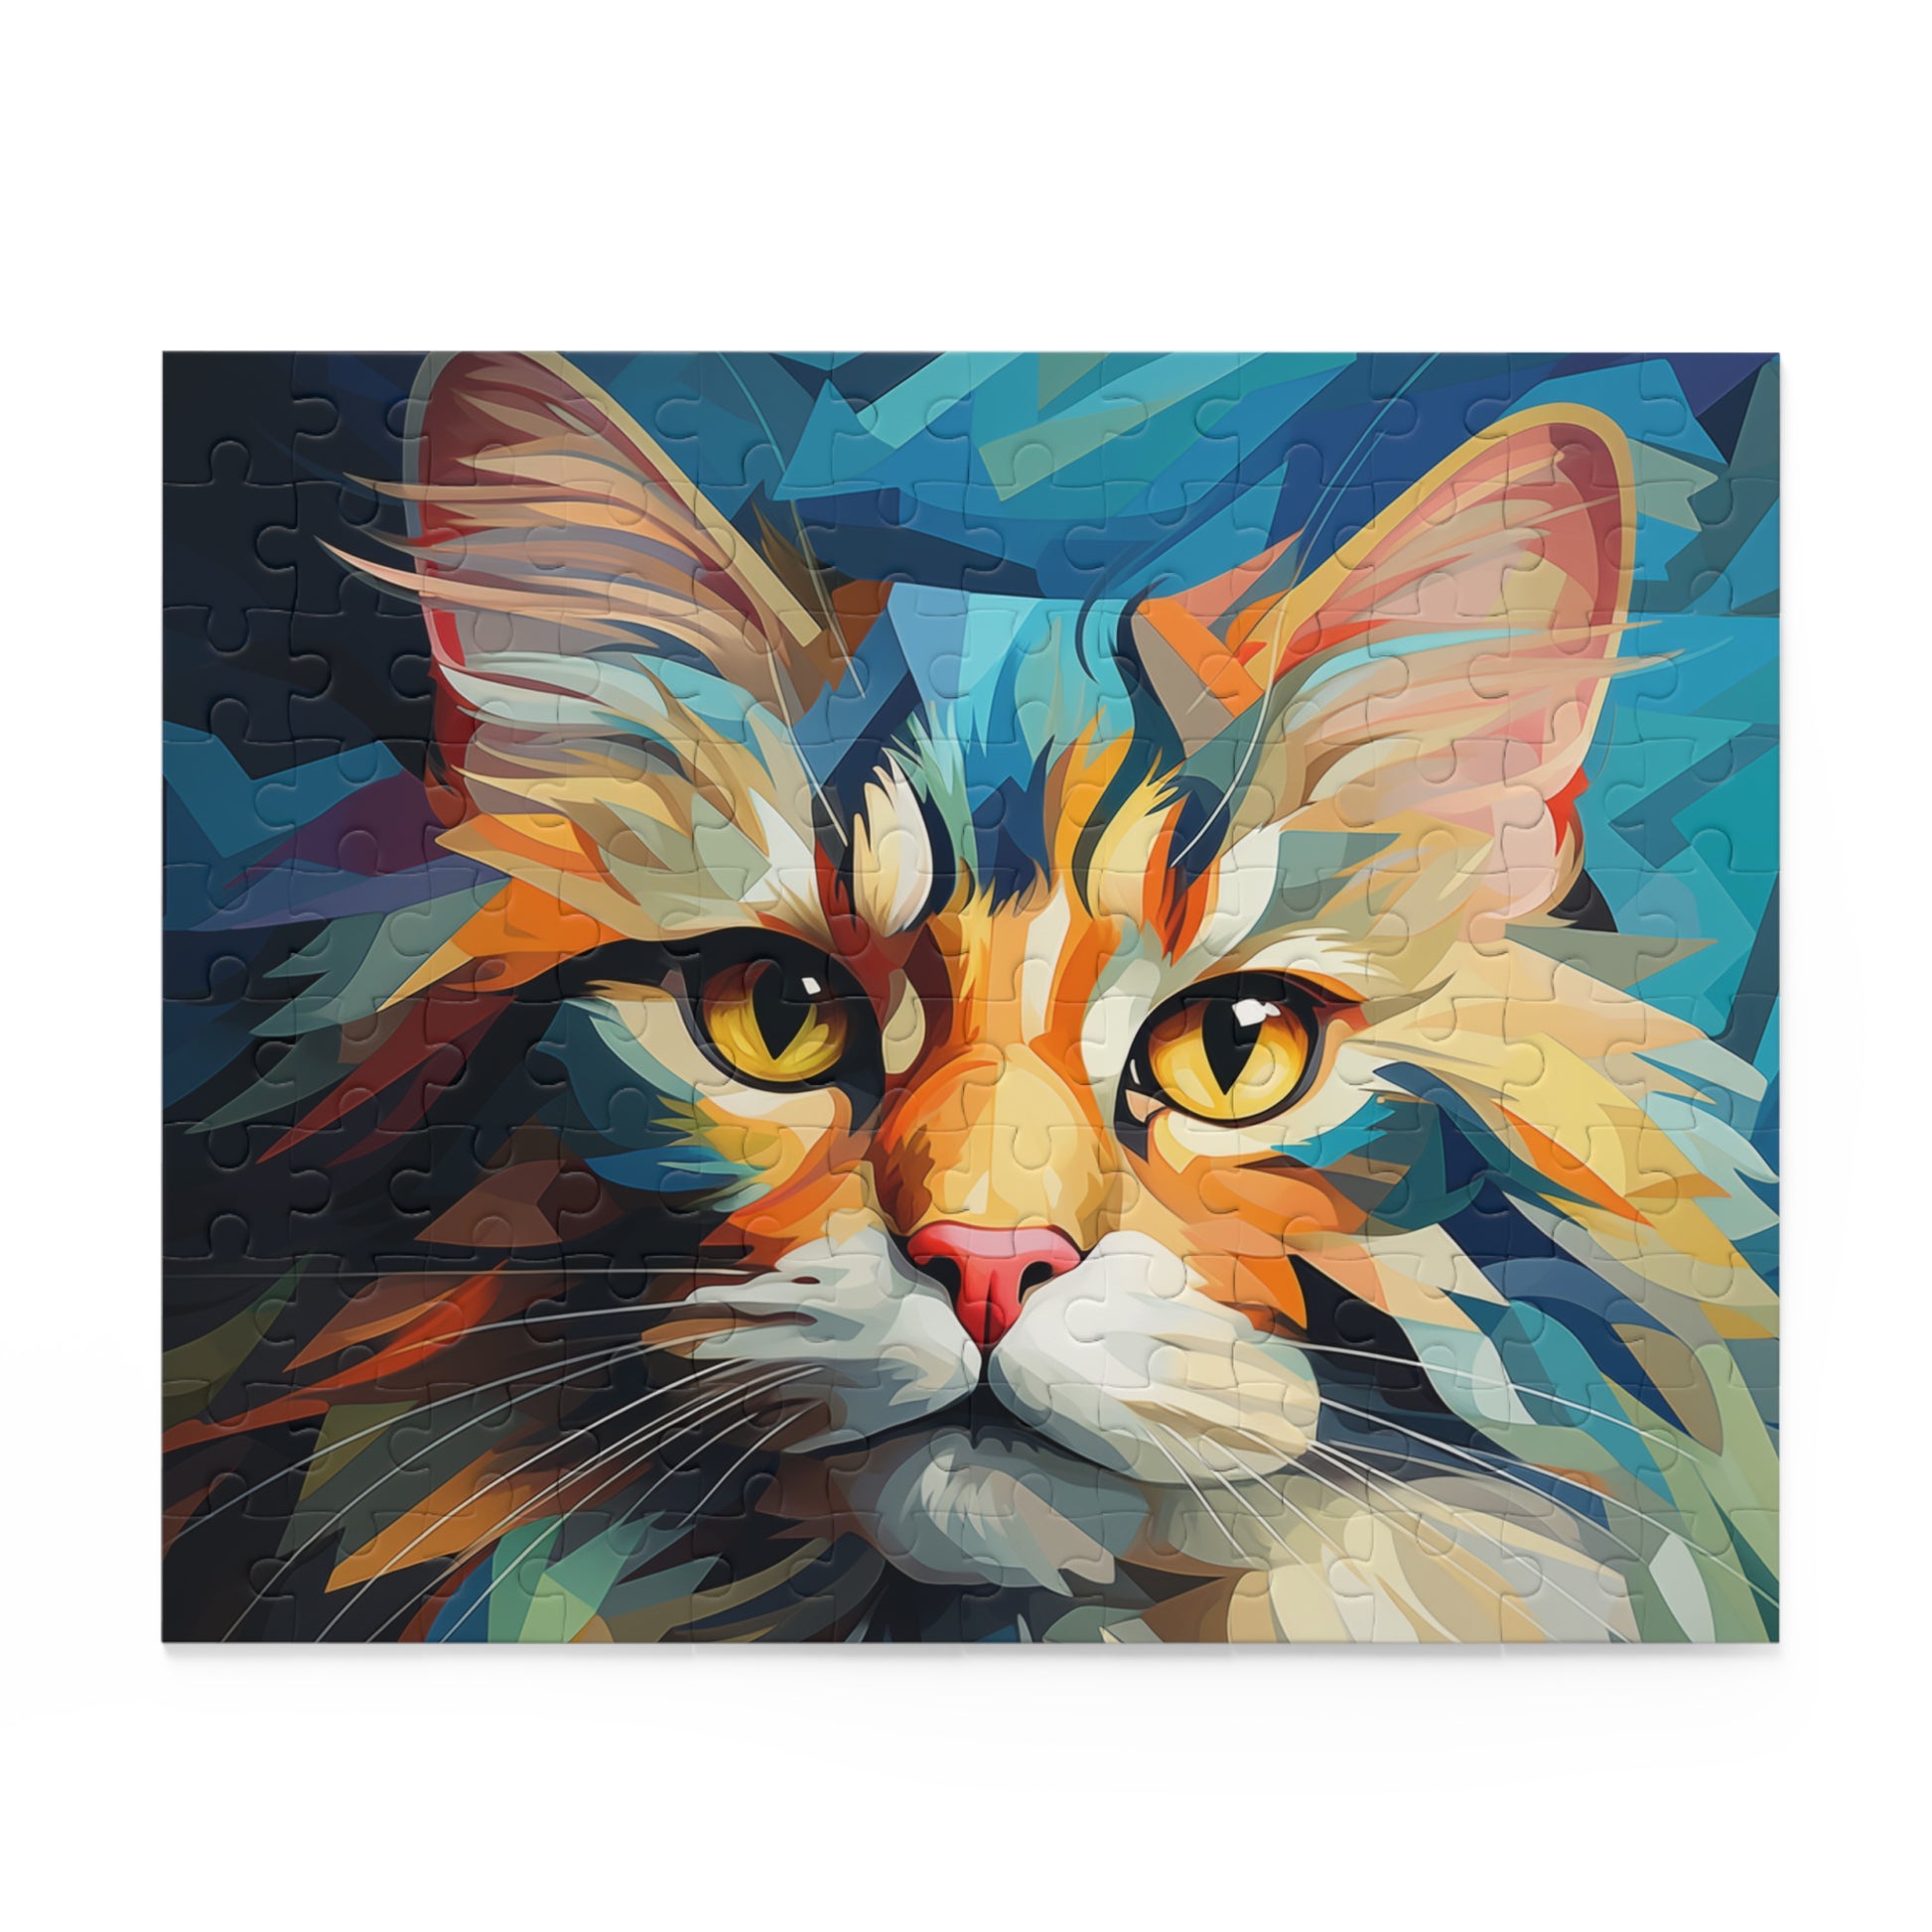 Abstract Oil Paint Watercolor Cat Jigsaw Puzzle Adult Birthday Business Jigsaw Puzzle Gift for Him Funny Humorous Indoor Outdoor Game Gift For Her Online-2